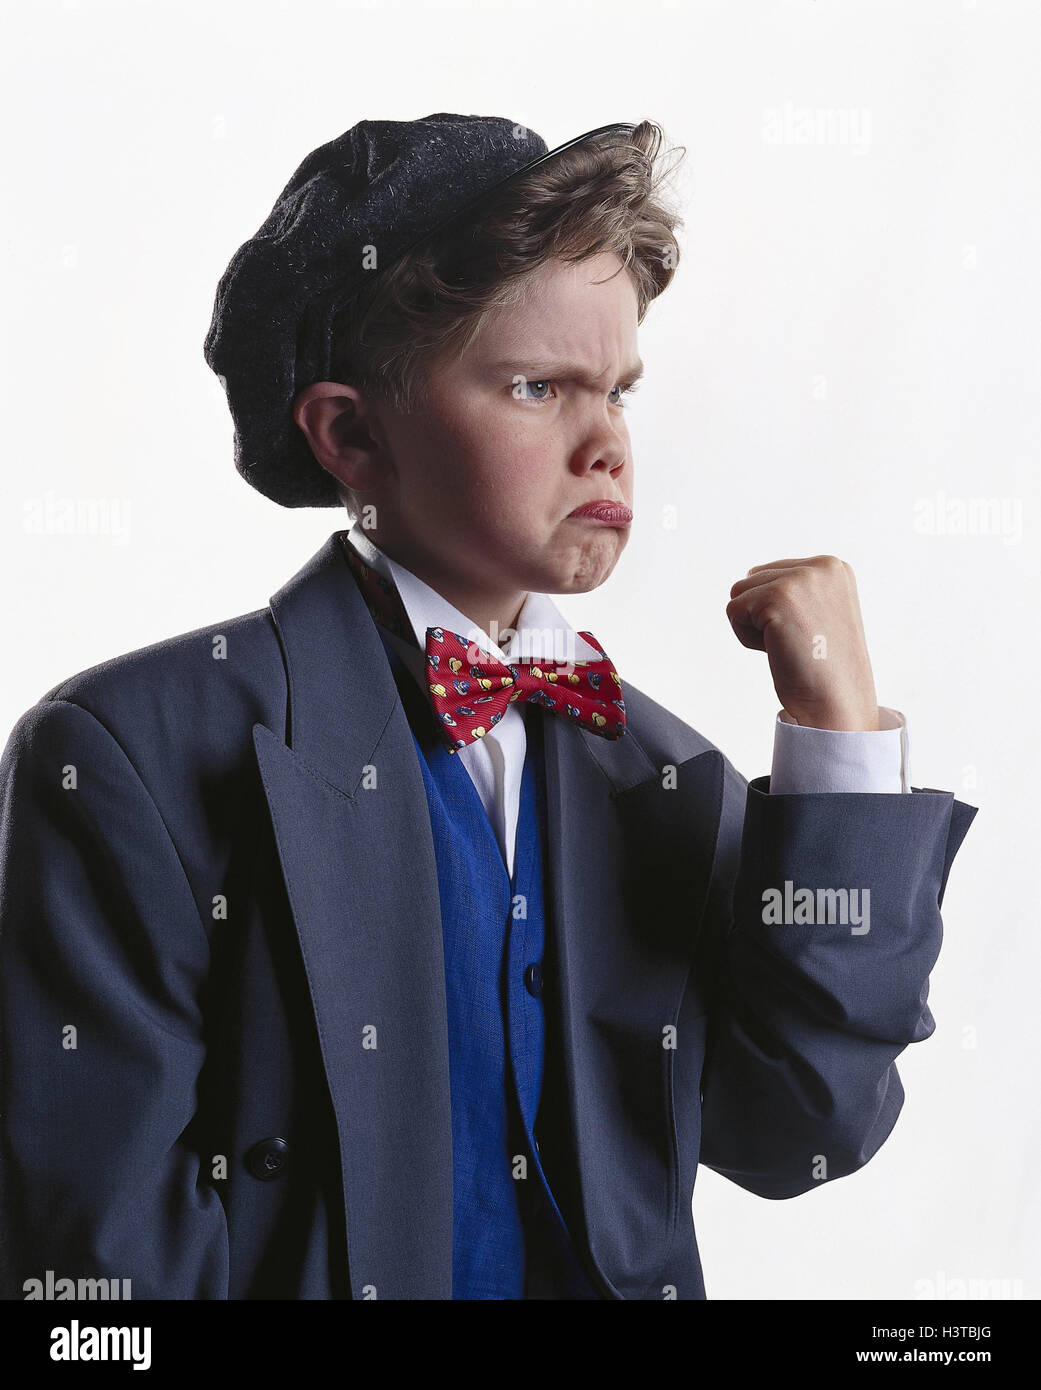 Boy, cap, suit and fly, gesture, concentrated fist mb 137 A5 Stock Photo